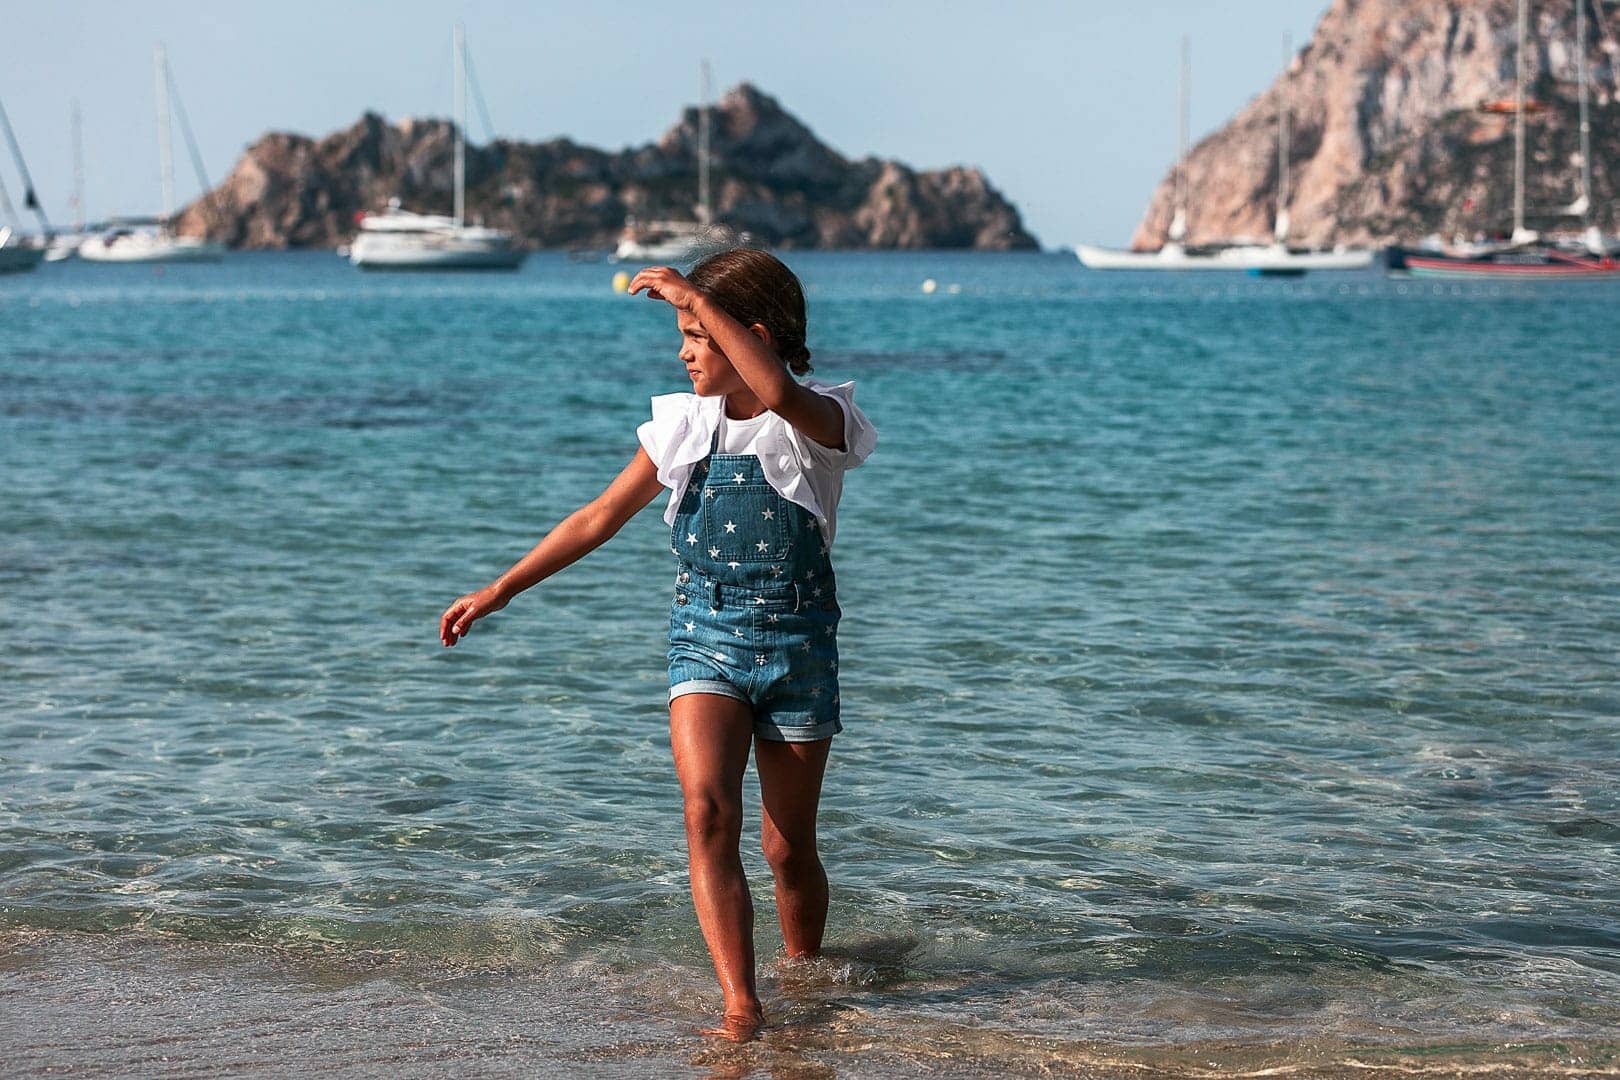 Photographic report of children's clothing with a girl walking on the shore of Cala Dort beach in Ibiza dressed in denim overalls